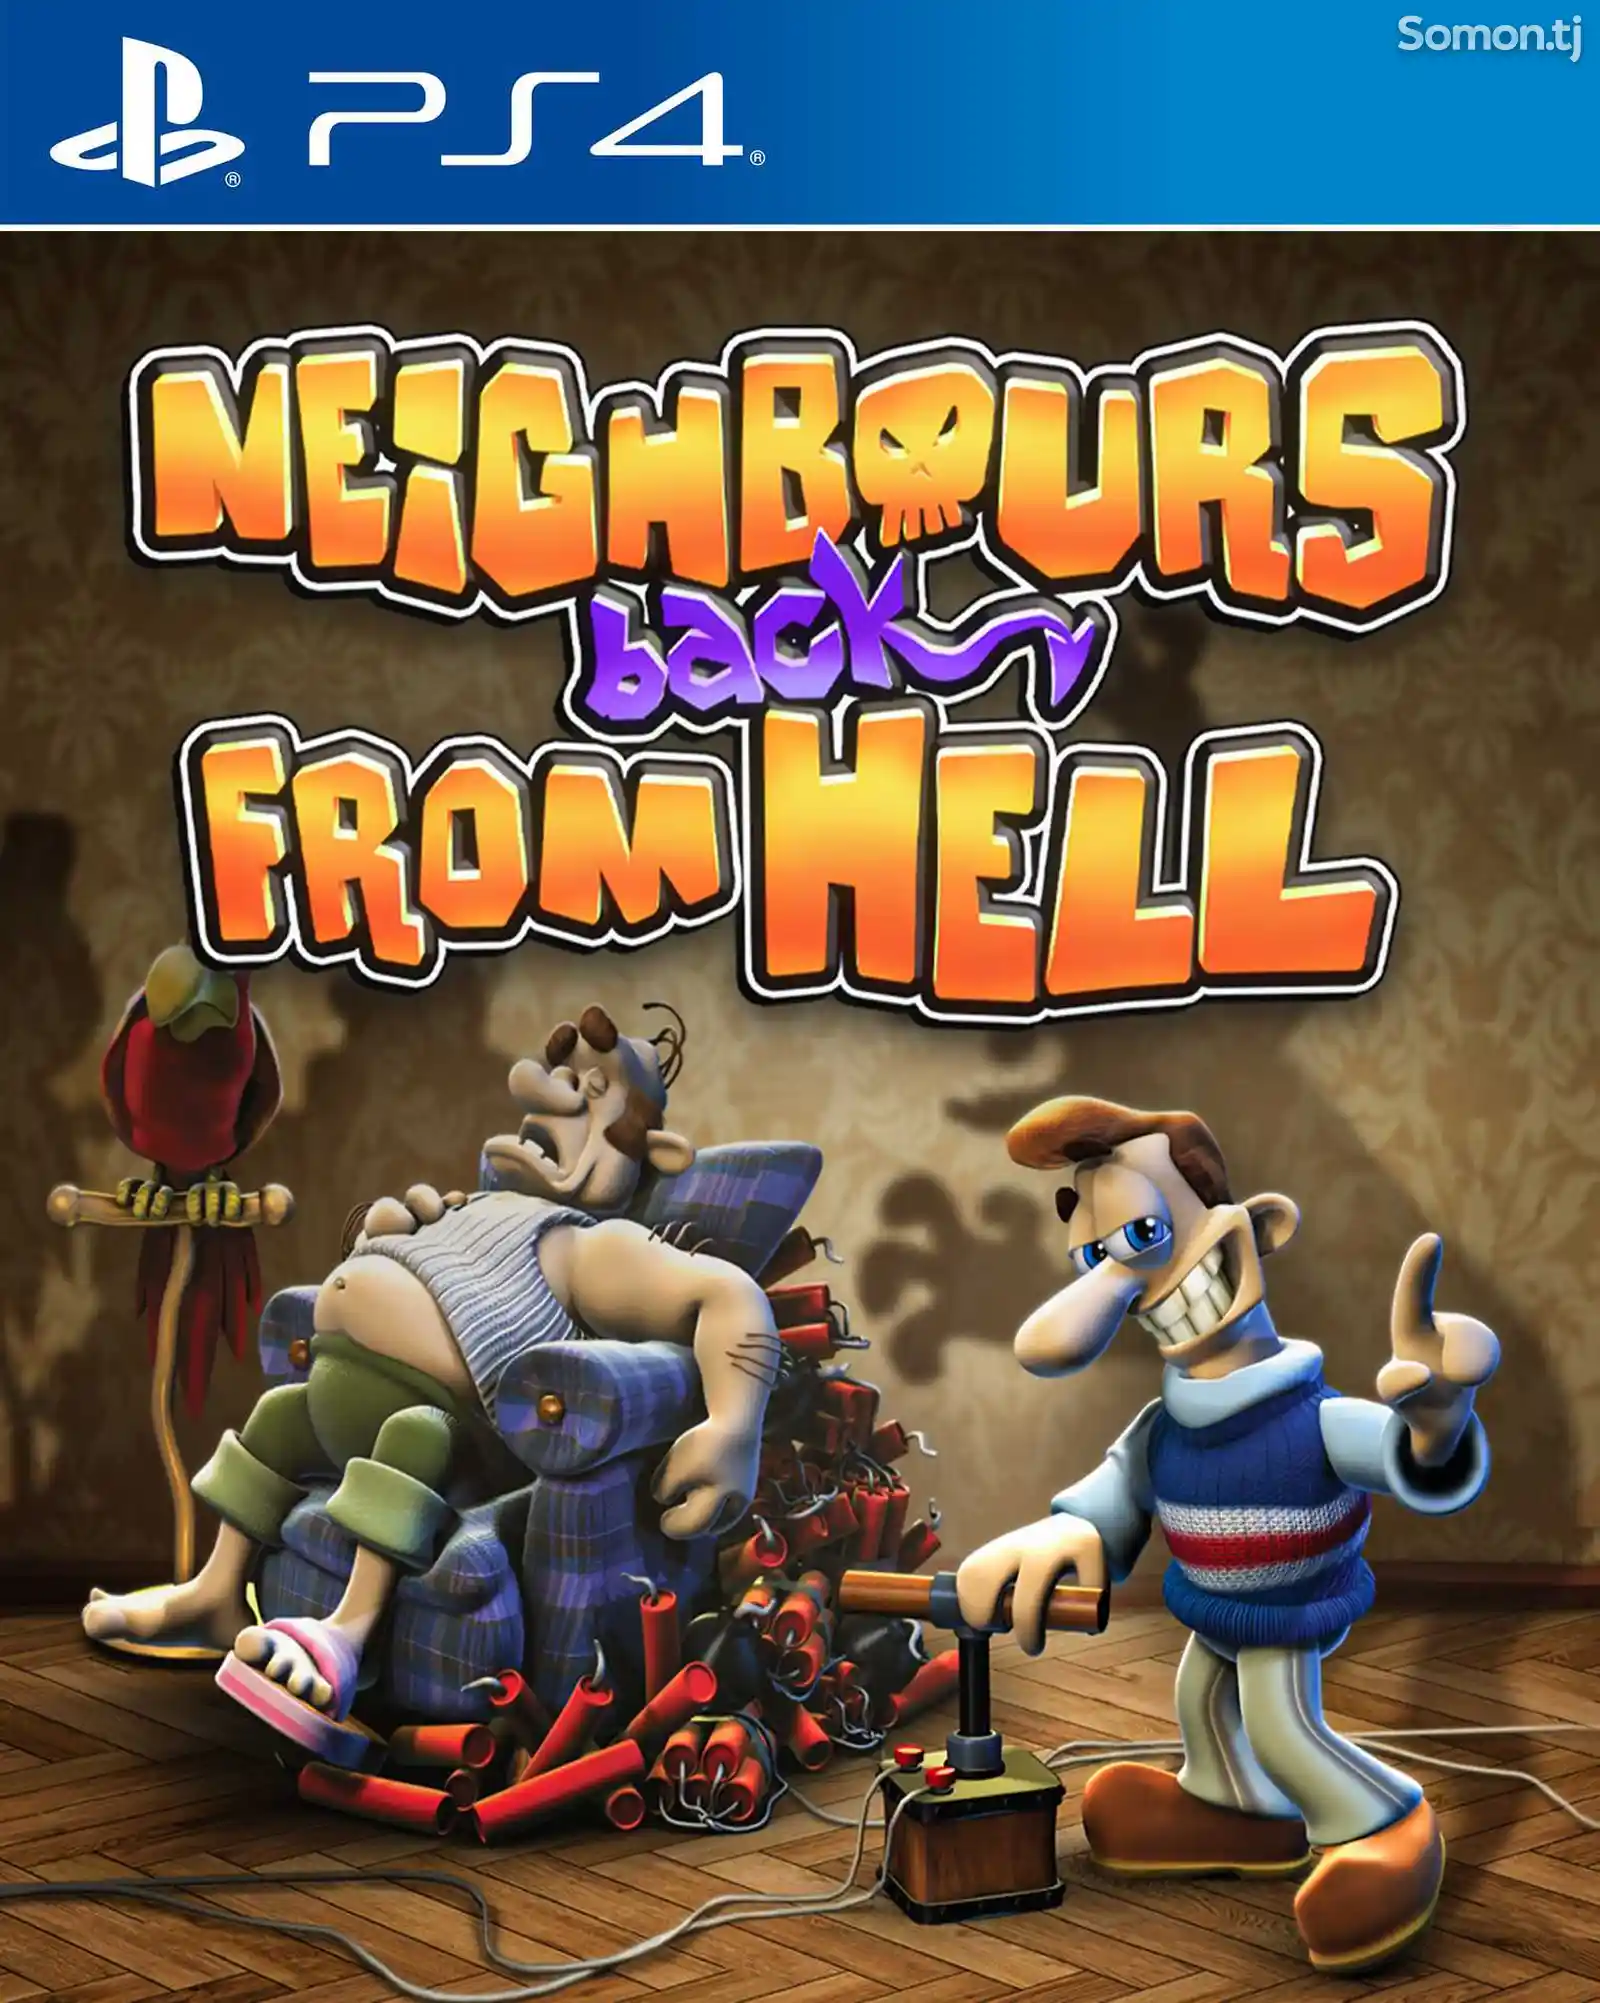 Игра Neighbours back from hell для PS-4 / 5.05 / 6.72 / 7.02 / 7.55 /-1